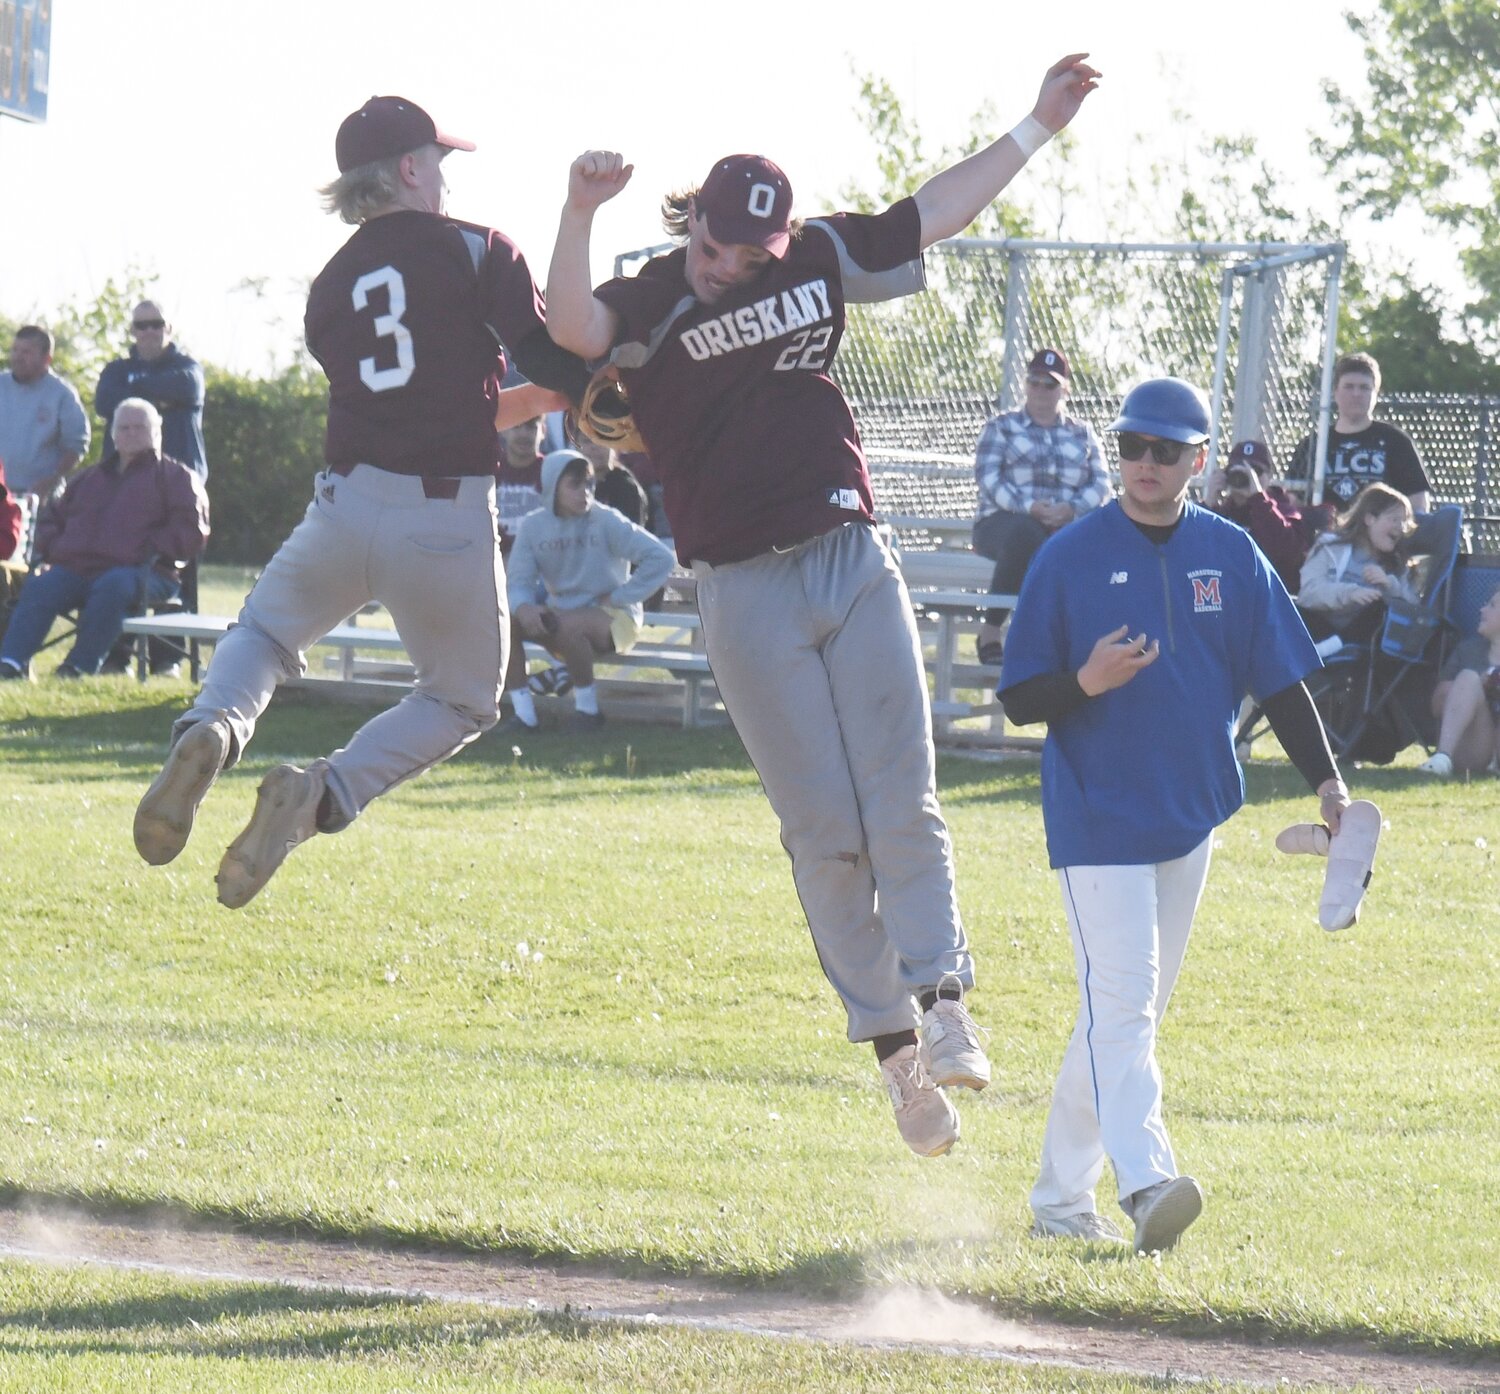 Oriskany’s Eddie Wright (3) and Noah Narolis celebrate after the team earned a 10-3 win over host New York Mills in a Section III Class D game. Wright earned the win on the mound, going 6 1/3 innings.